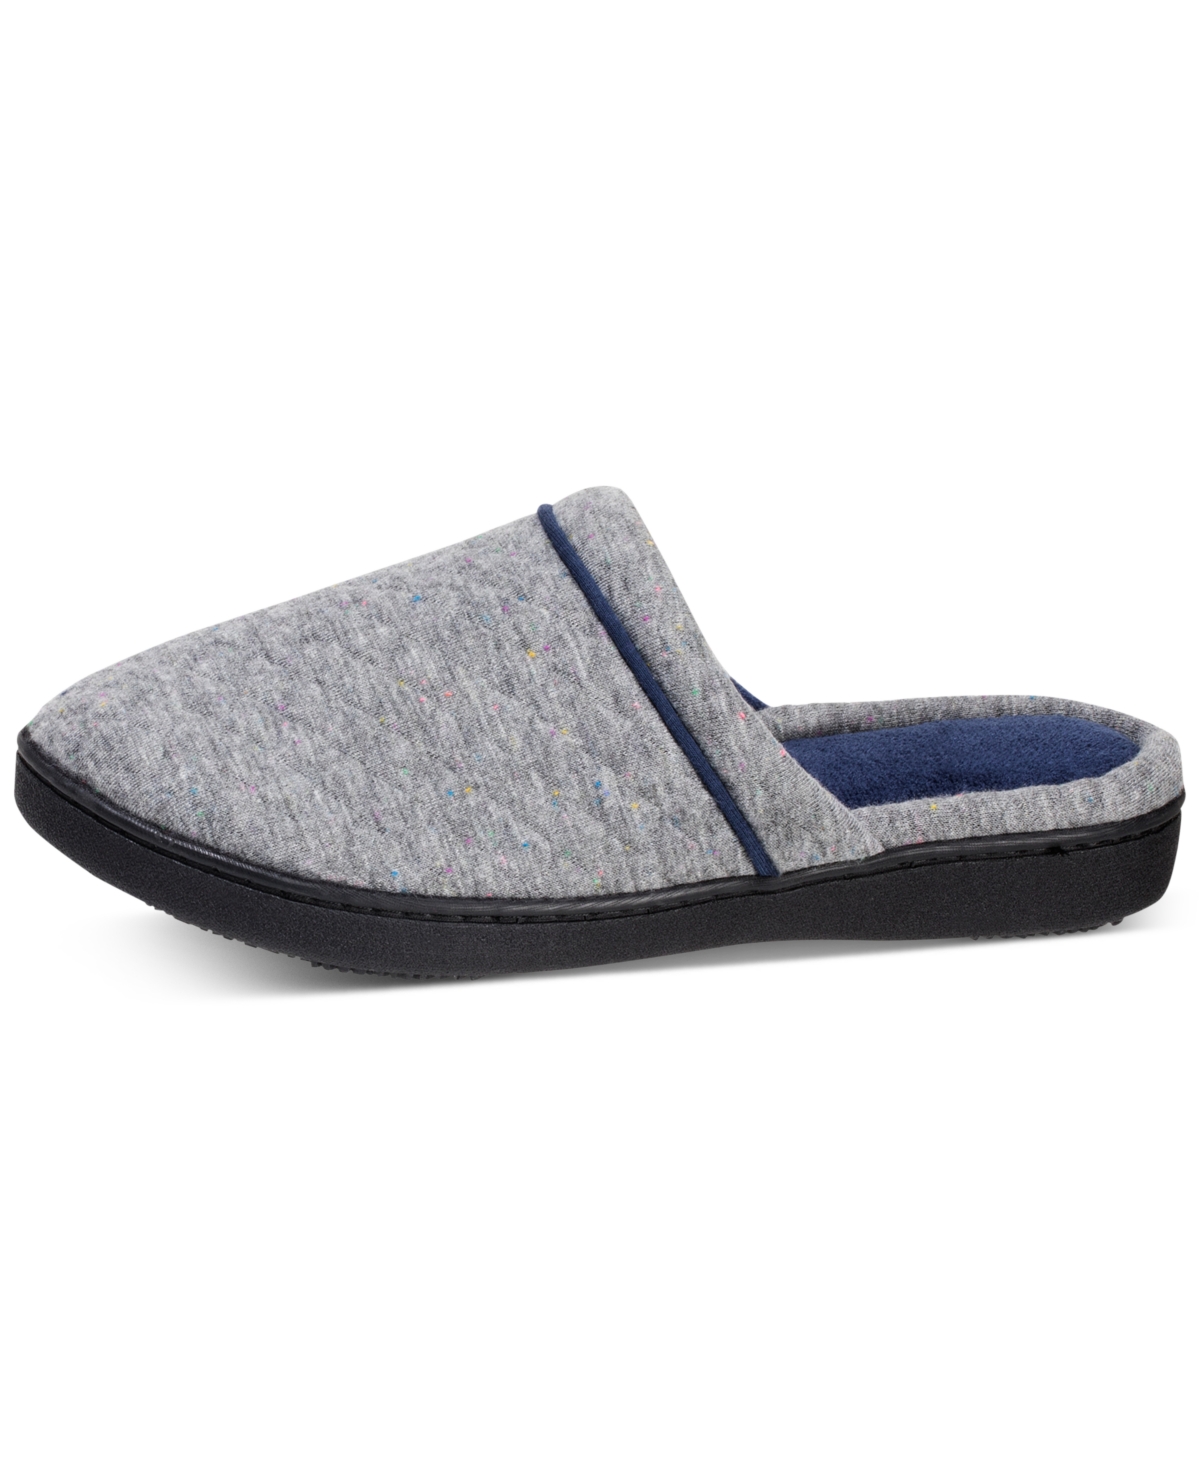 Women's Quilted Jersey Deena Clog with Memory Foam - Heather Grey